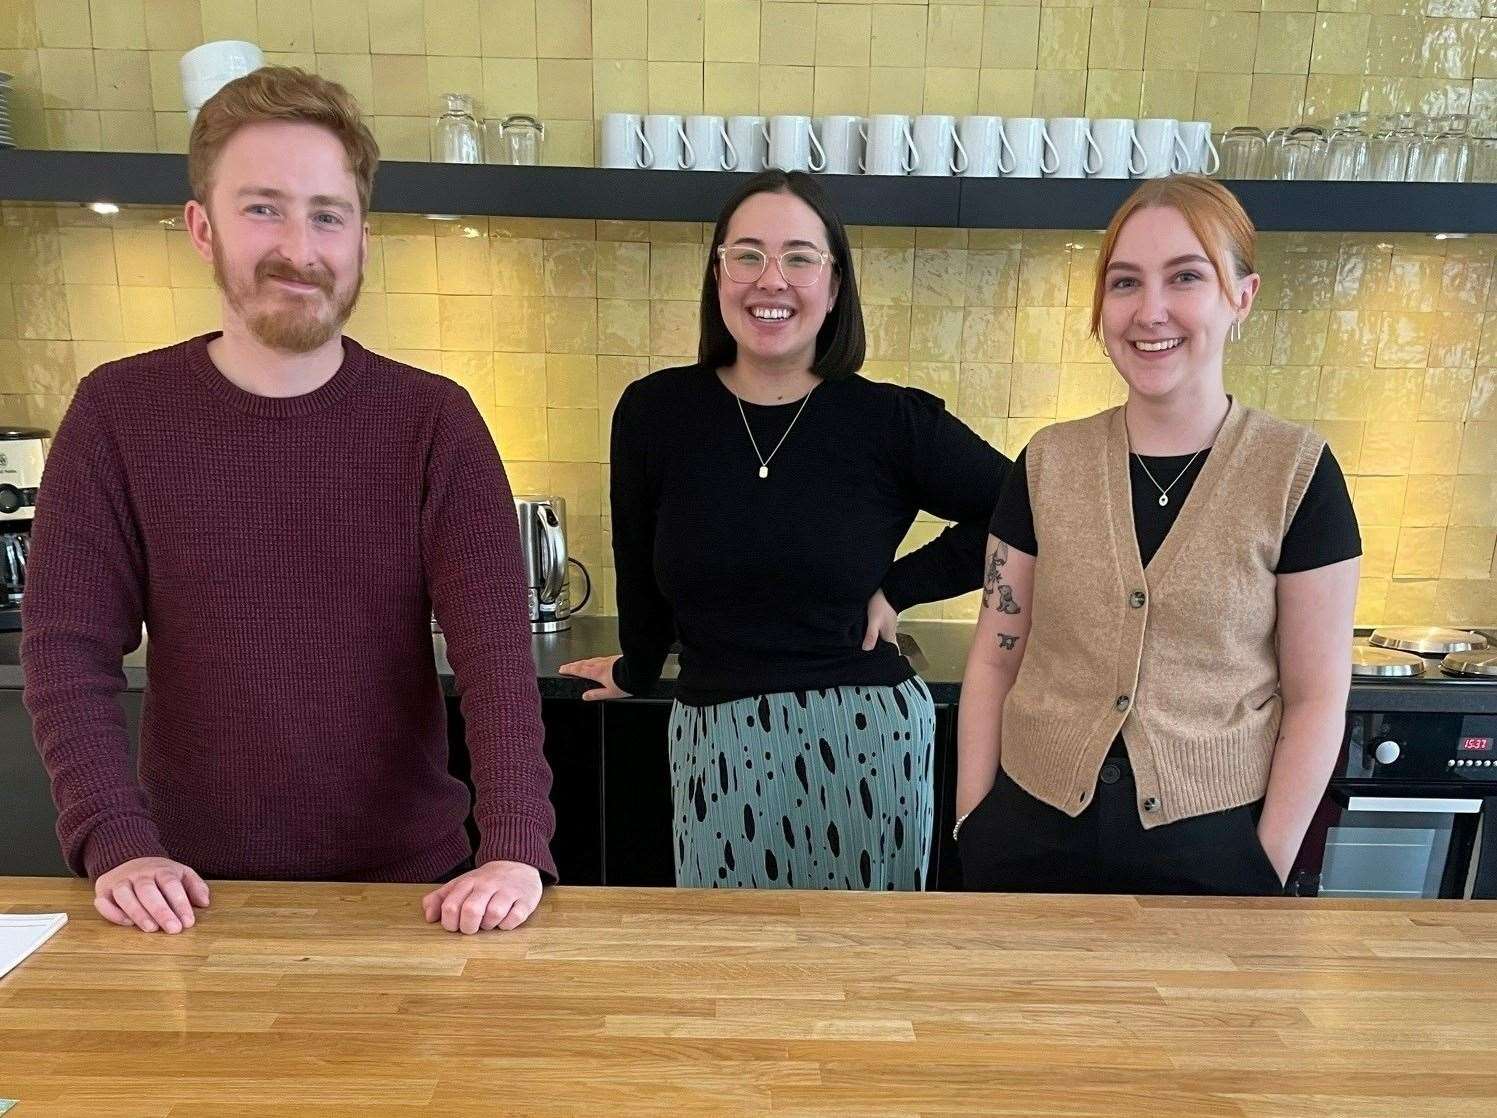 Maggie’s Aberdeen has welcomed Ryan Wilson, Annah Cargill and Libby Stainer.